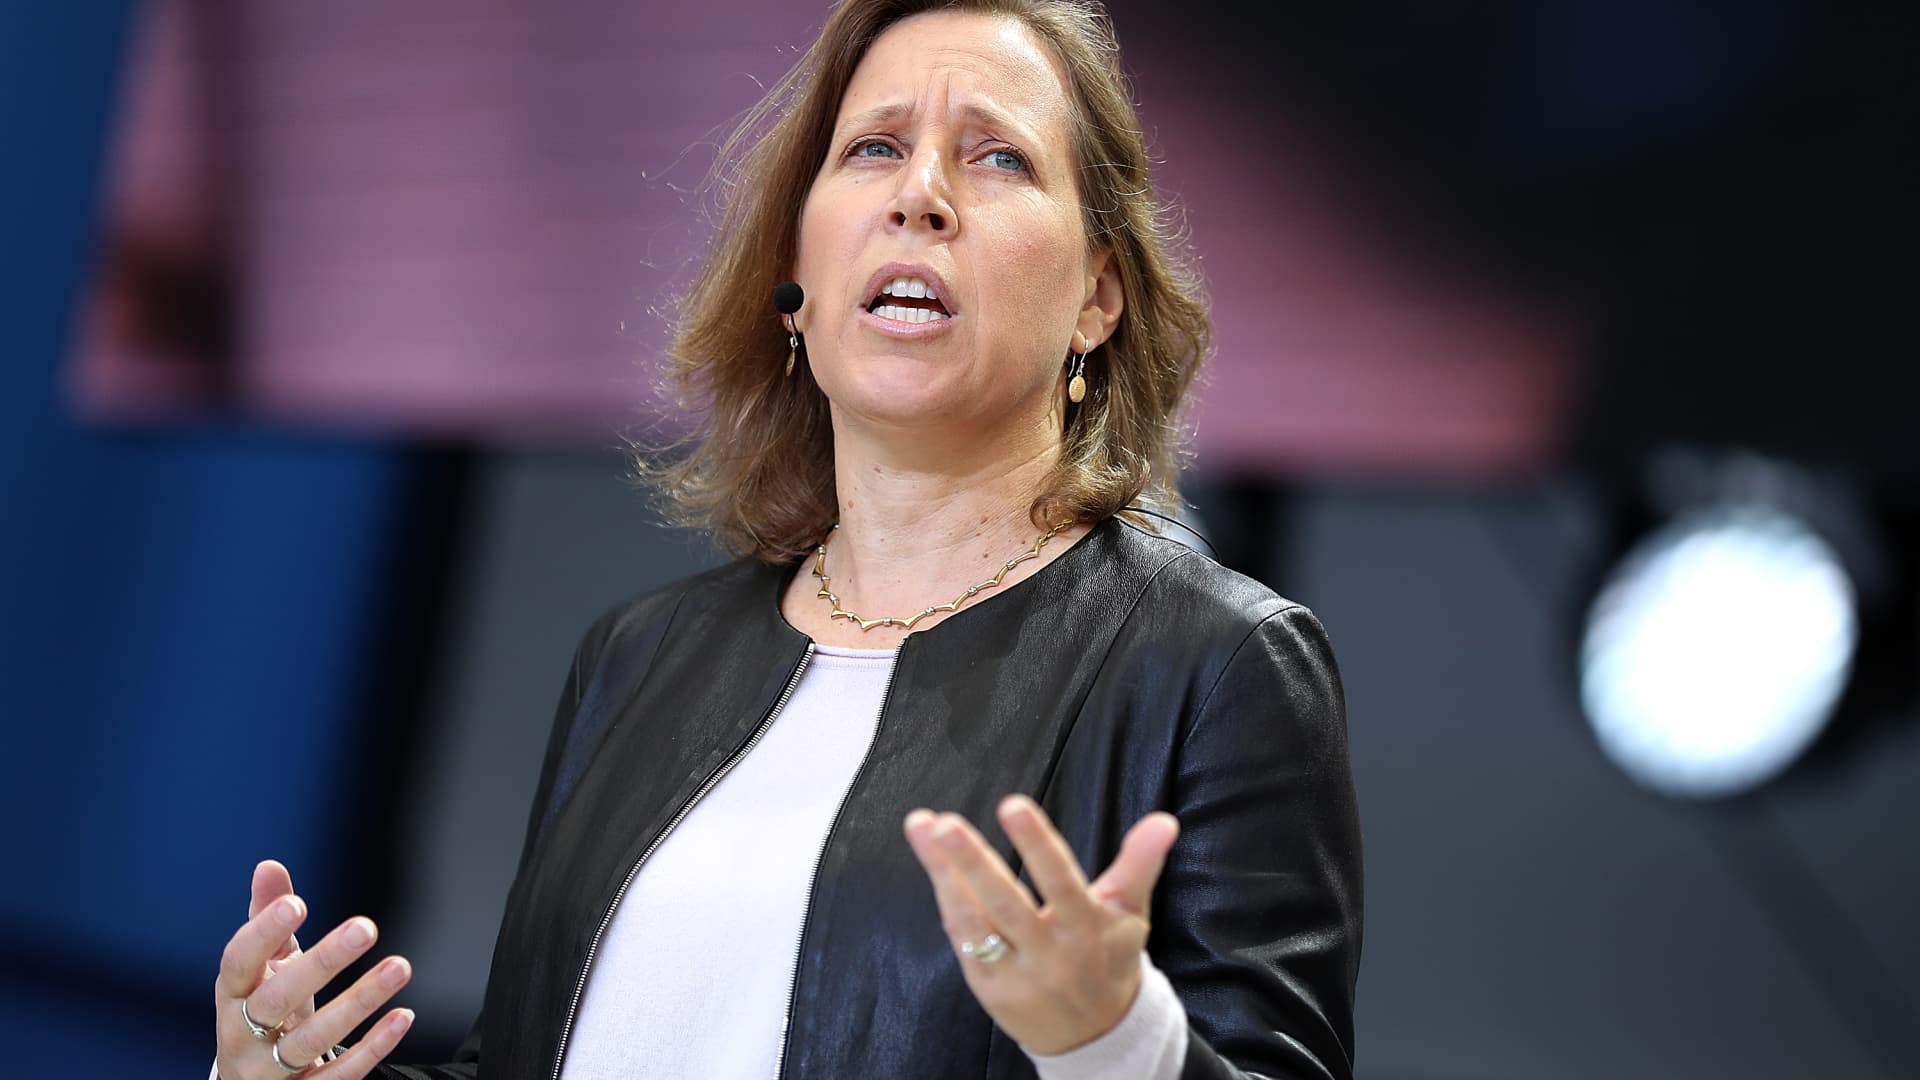 Susan Wojcicki was in talks to be Elon Musk’s number two at Tesla before taking YouTube CEO role, book says